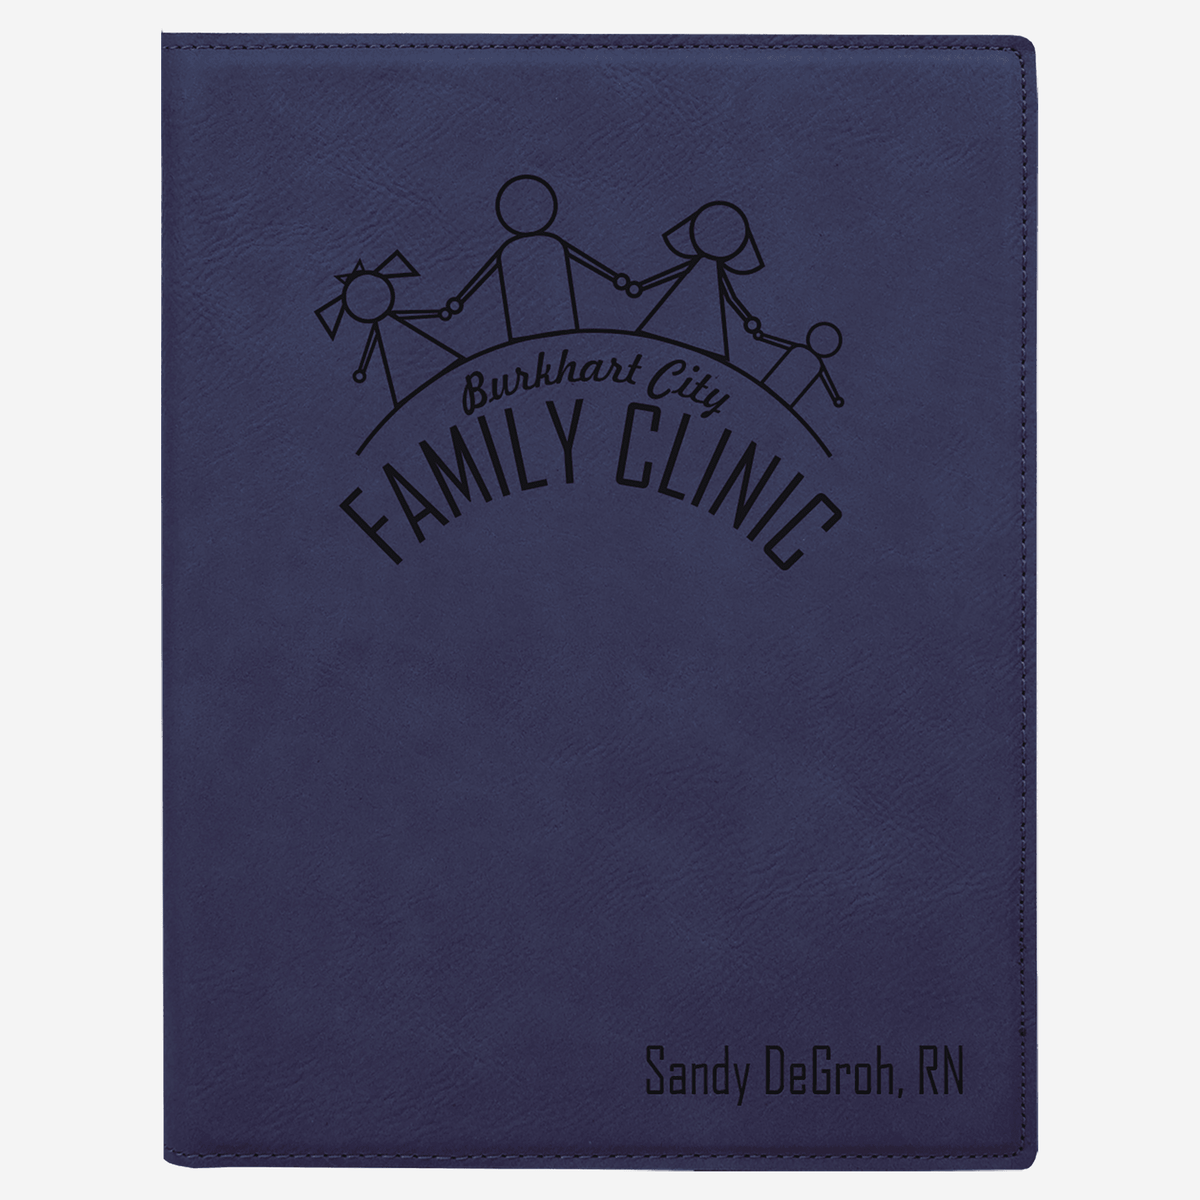 7" x 9" Laserable Navy Blue Leatherette Small Portfolio with Notepad front view with black engraving family drawing Burkhart City Family Clinic engraving